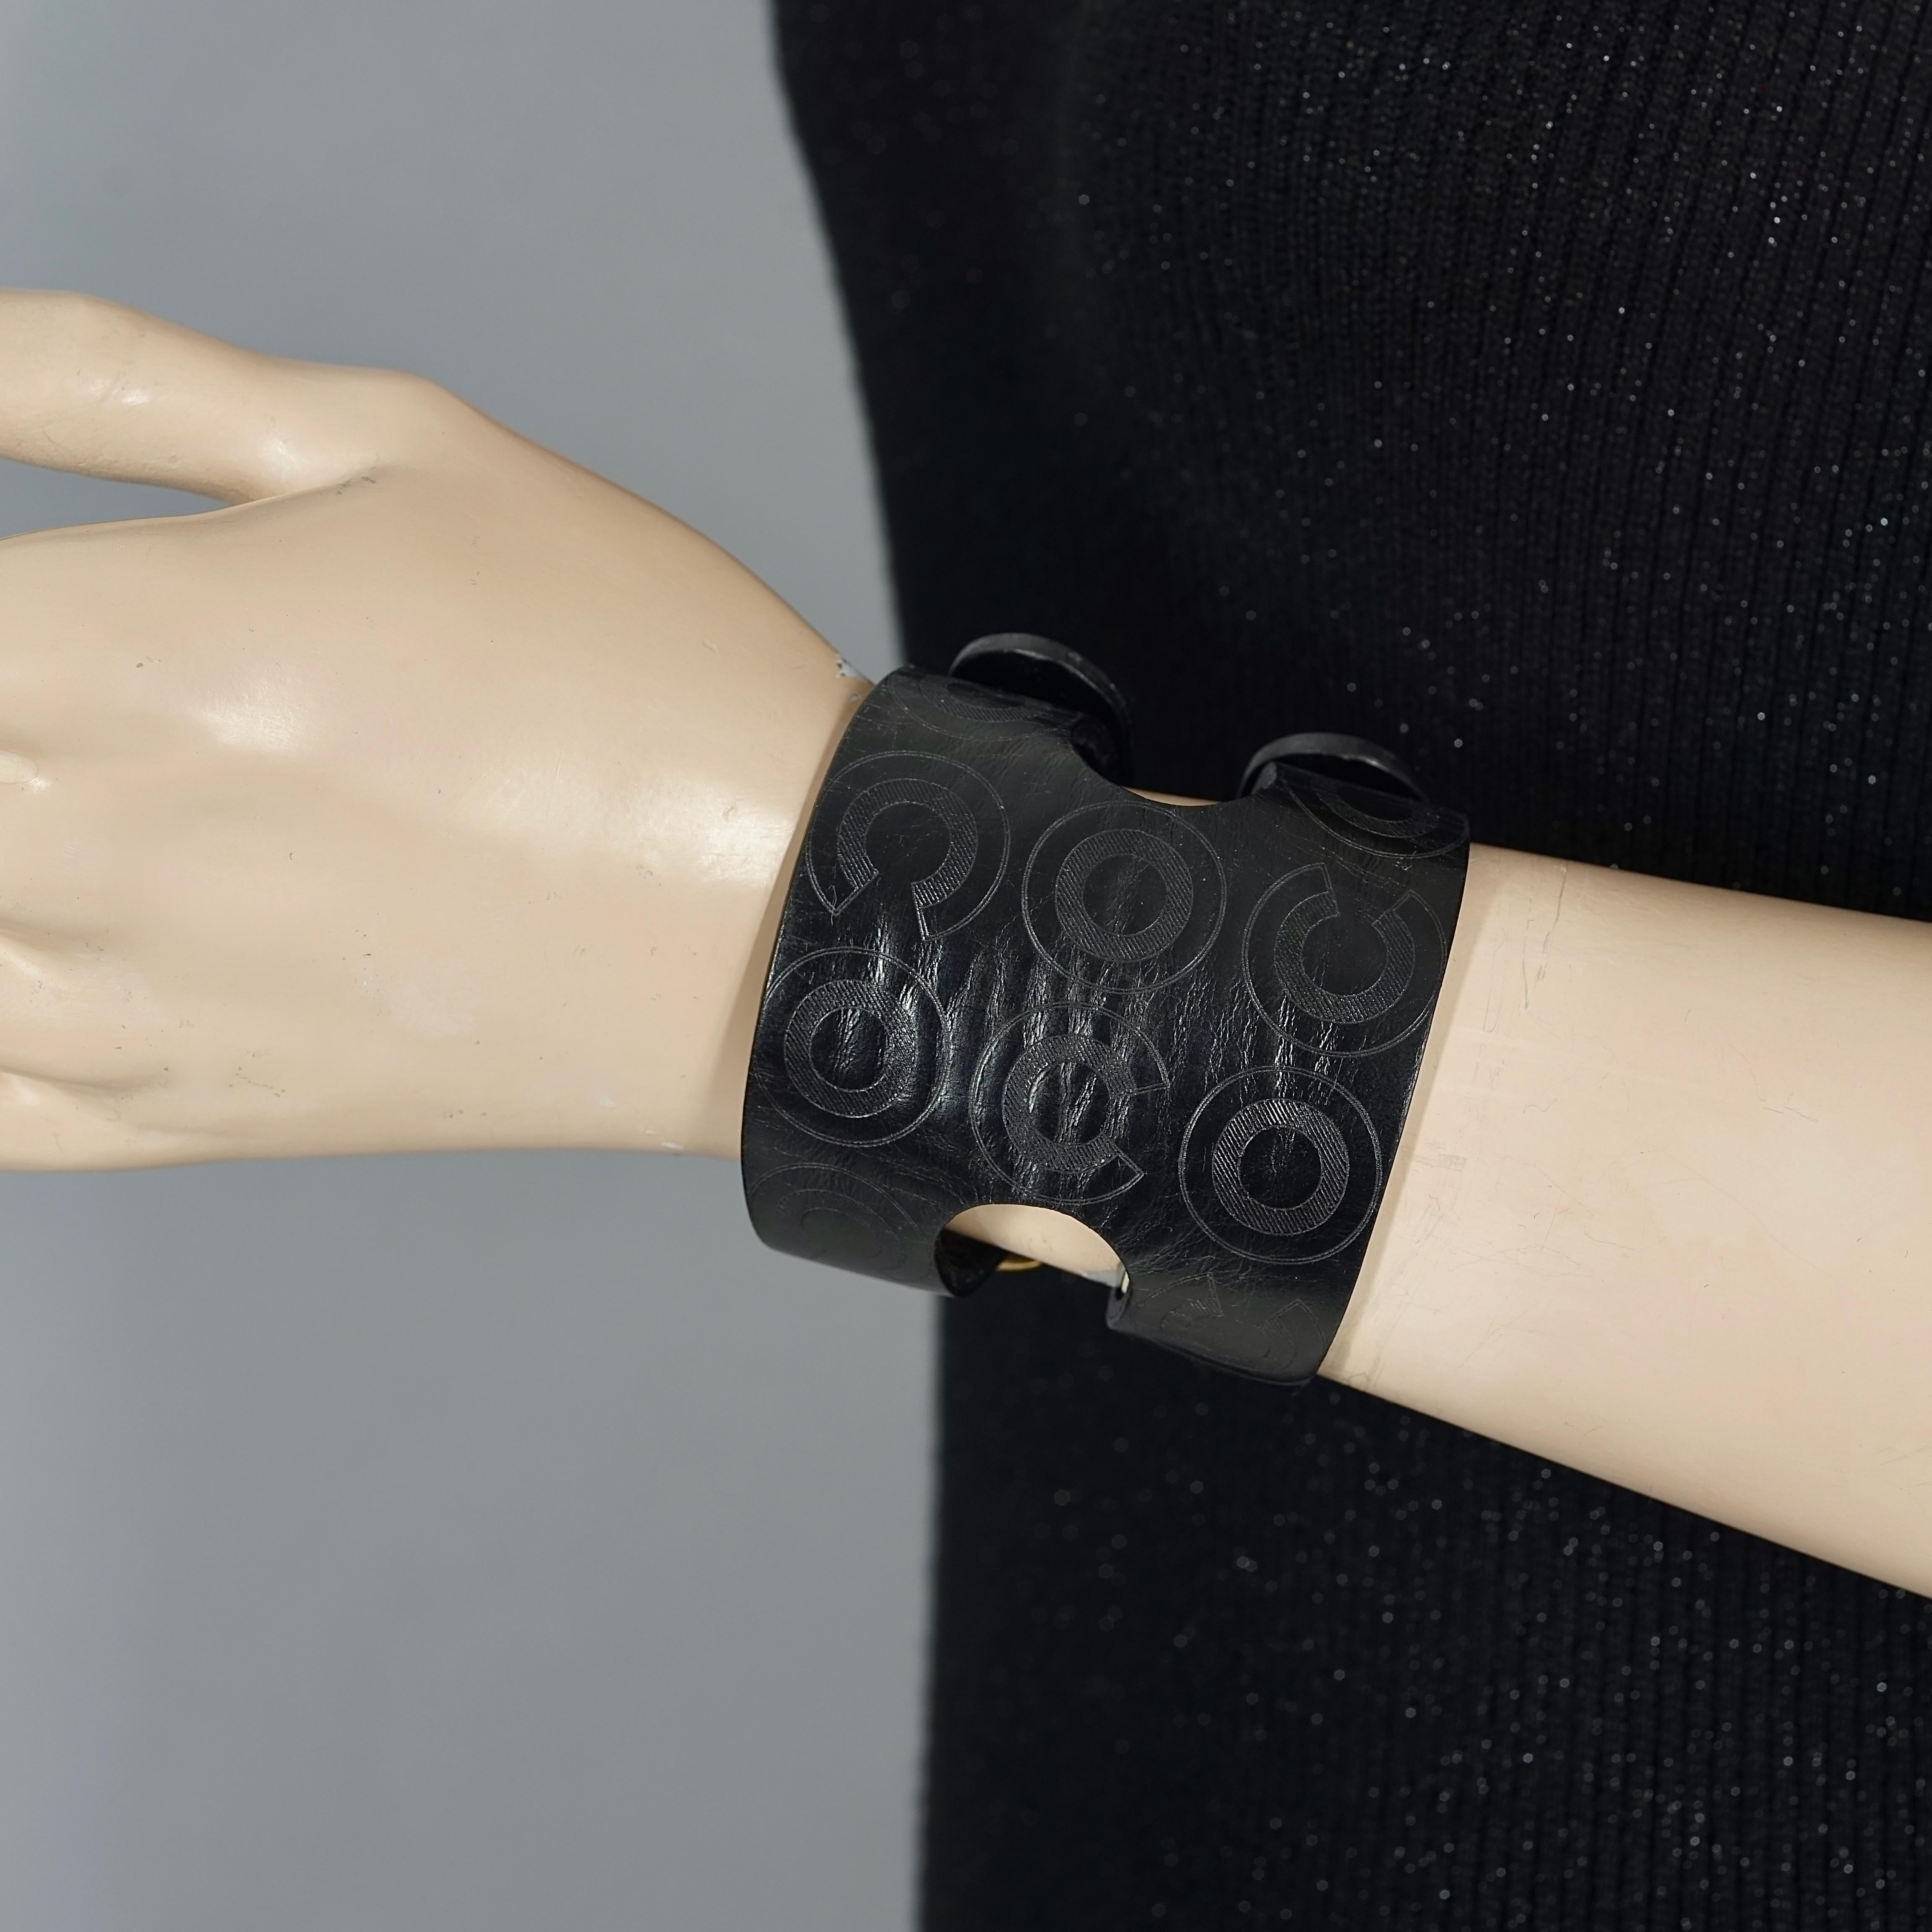 
Vintage CHANEL Coco Black Leather Buckle Cuff Bracelet

Measurements:
Height: 2.56 inches (6.5 cm)
Circumference: 6.50 inches to 8.27 inches (16.5 cm to 21 cm)

Features:
- 100% Authentic CHANEL.
- Wide black leather with engraved COCO on the